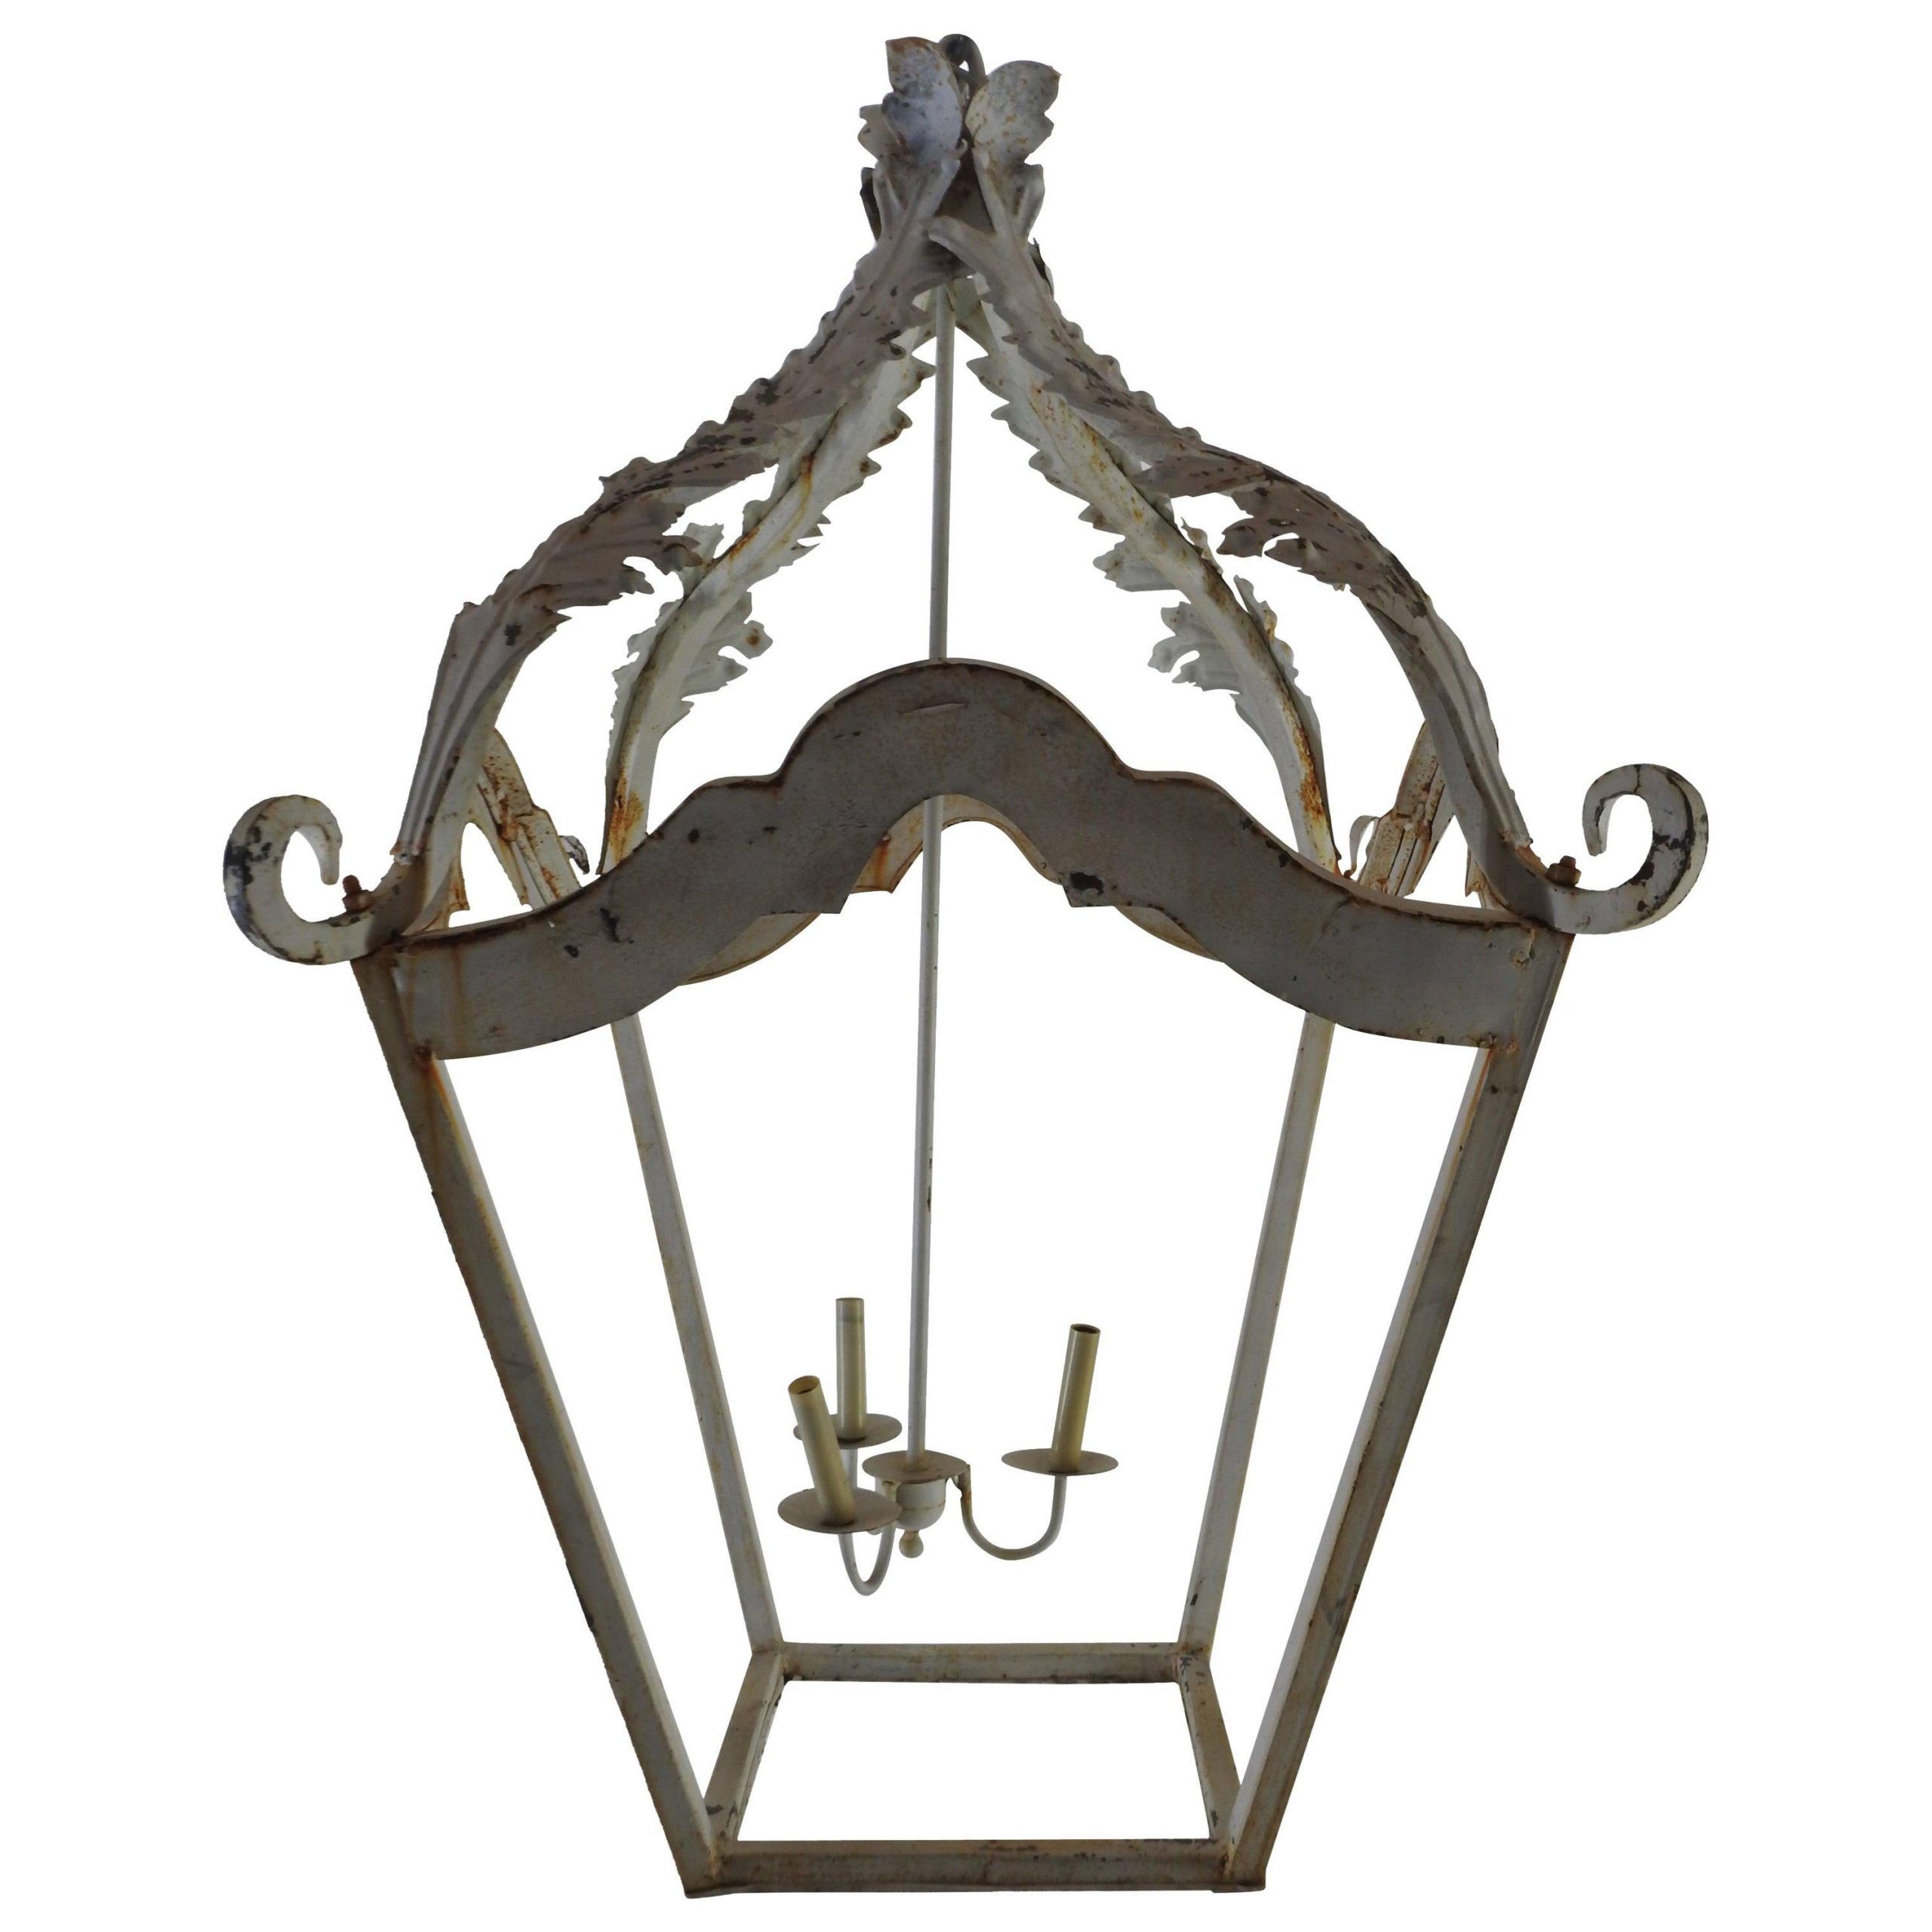 Best And Newest French White Cast Iron Lantern Chandelier For Sale At 1stdibs Inside French Iron Lantern Chandeliers (View 6 of 10)